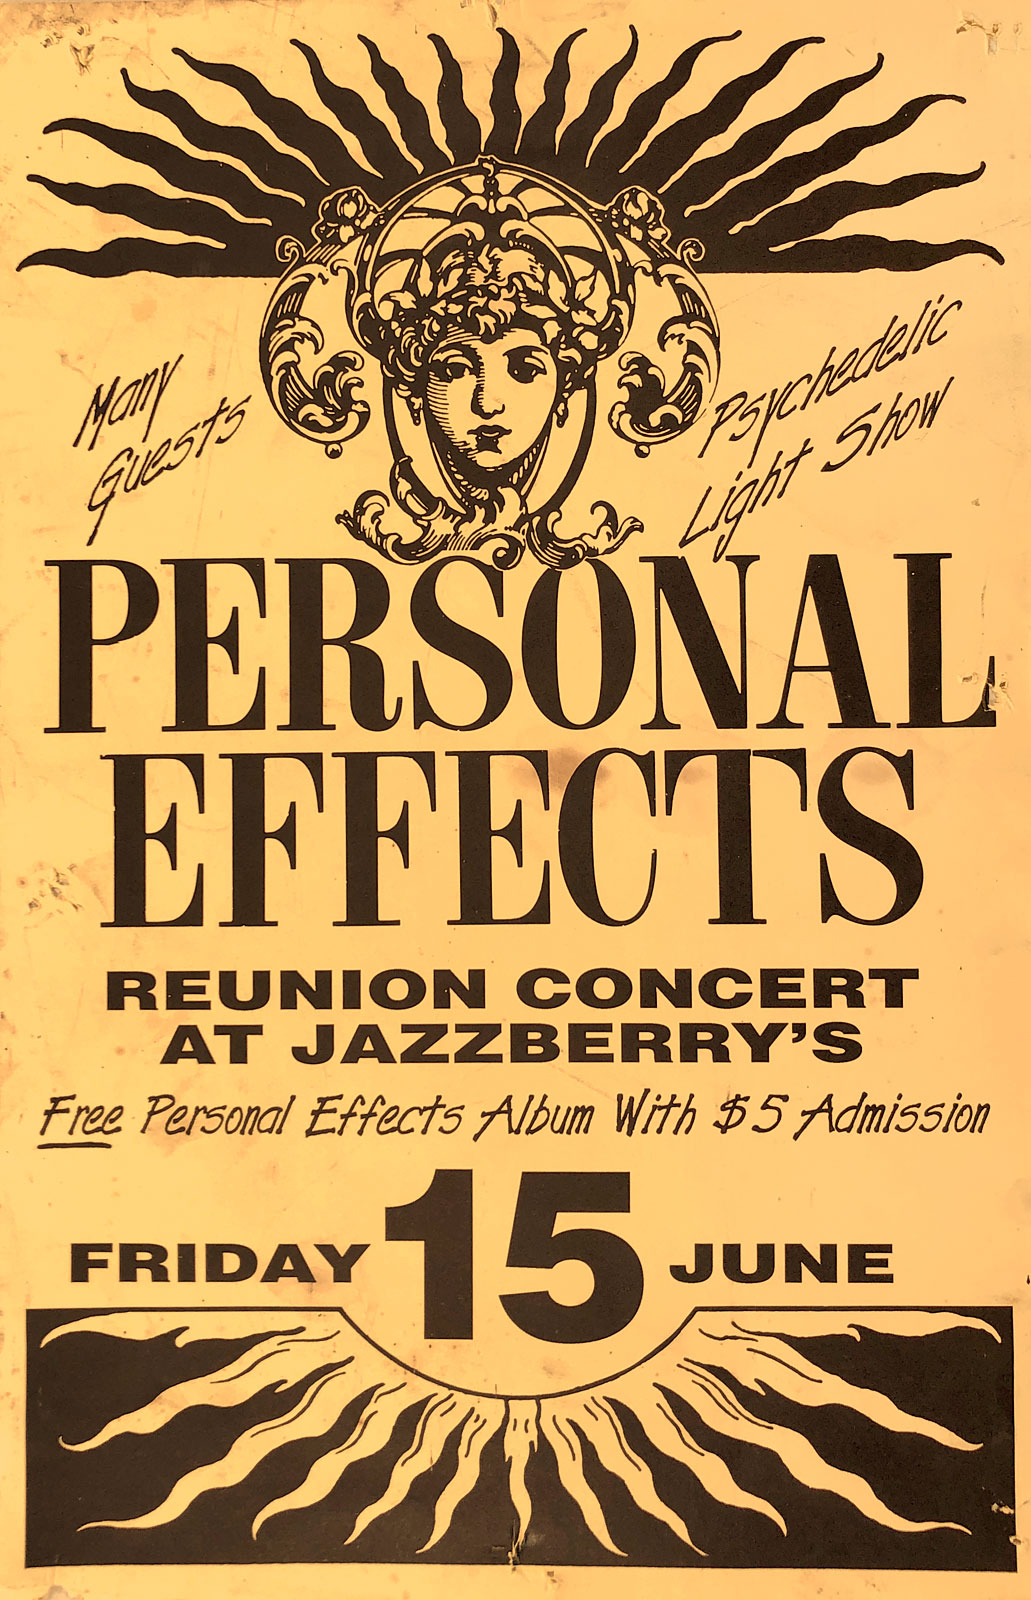 Poster for Personal Effects Reunion Concert at Jazzberry's in Rochester, New York on 06.15.1990